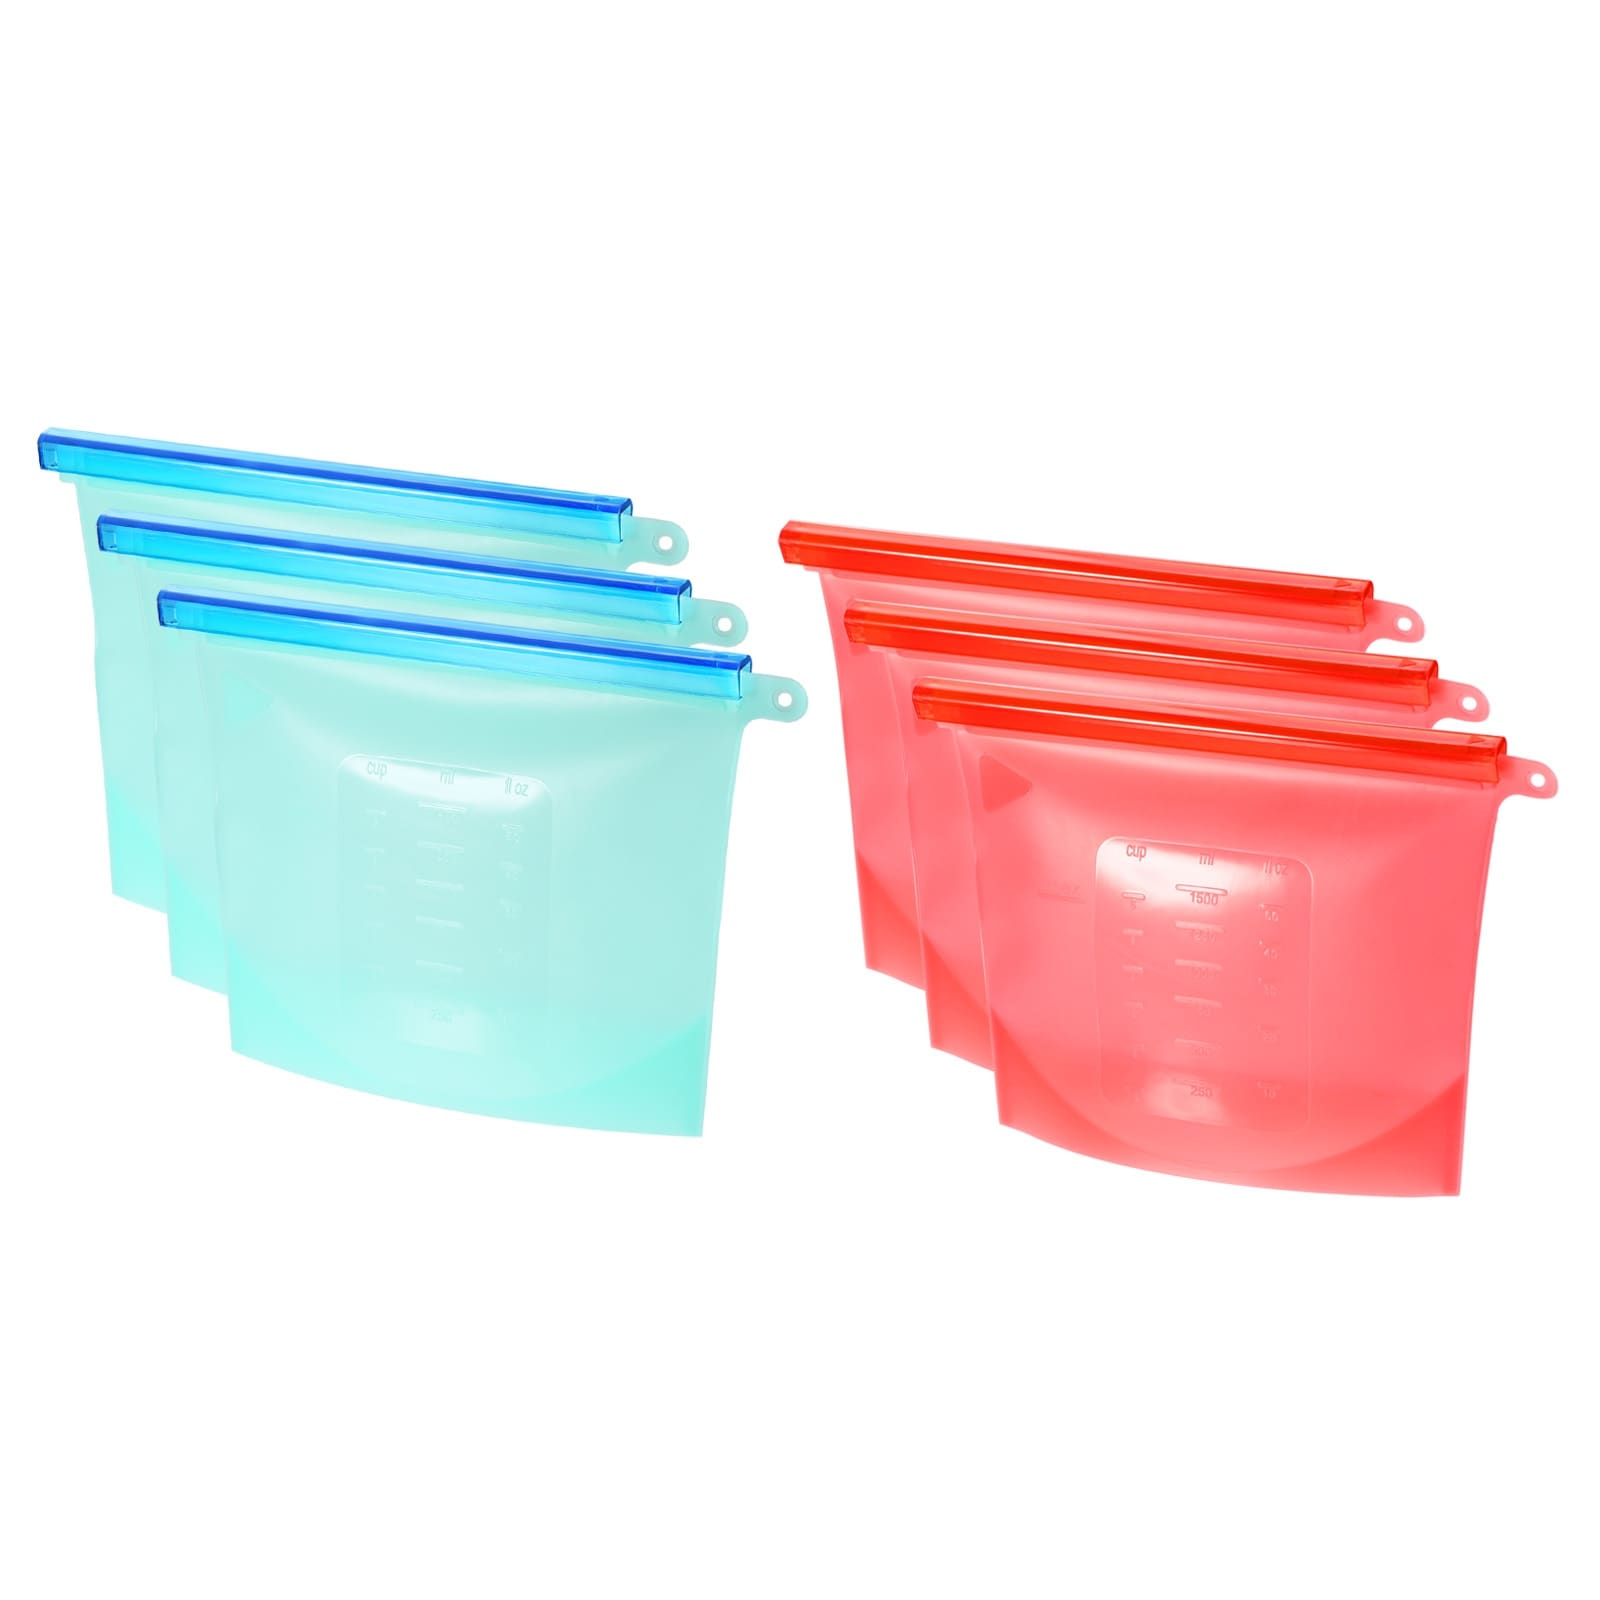 https://ak1.ostkcdn.com/images/products/is/images/direct/7f5ab1c84a1603b43fbc4cba545286200fea5e11/Silicone-Storage-Bags-Reusable-Food-Storage-Containers-Freezer-Bags-Blue%2BRed.jpg